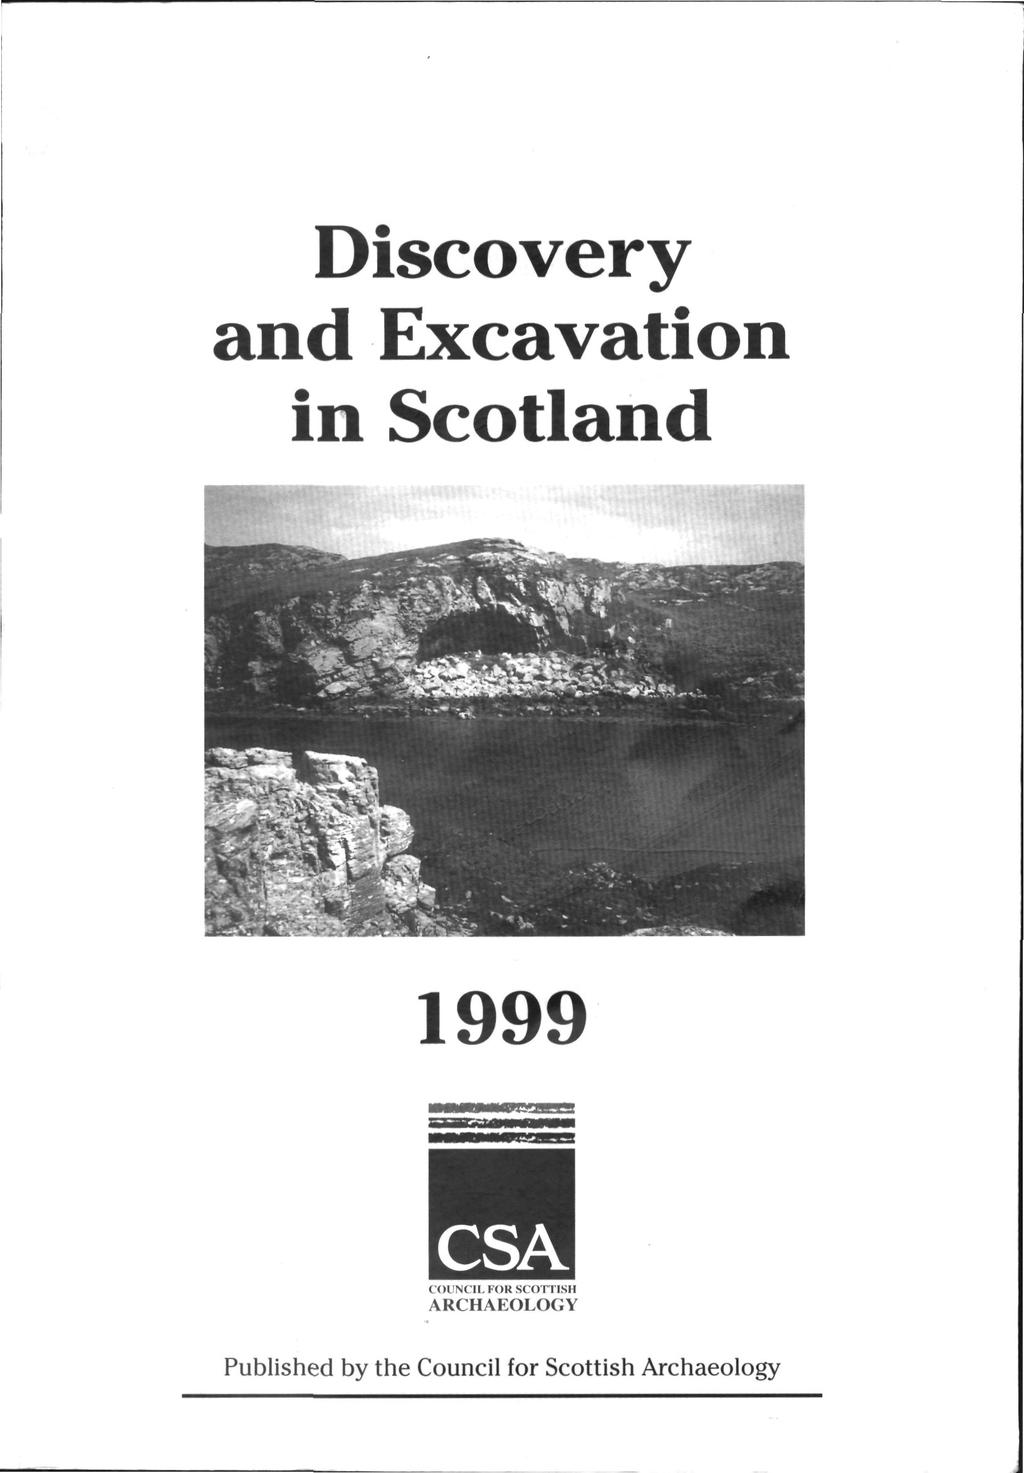 Discovery and Excavation in Scotland 1999 CSA COUNCIL FOR